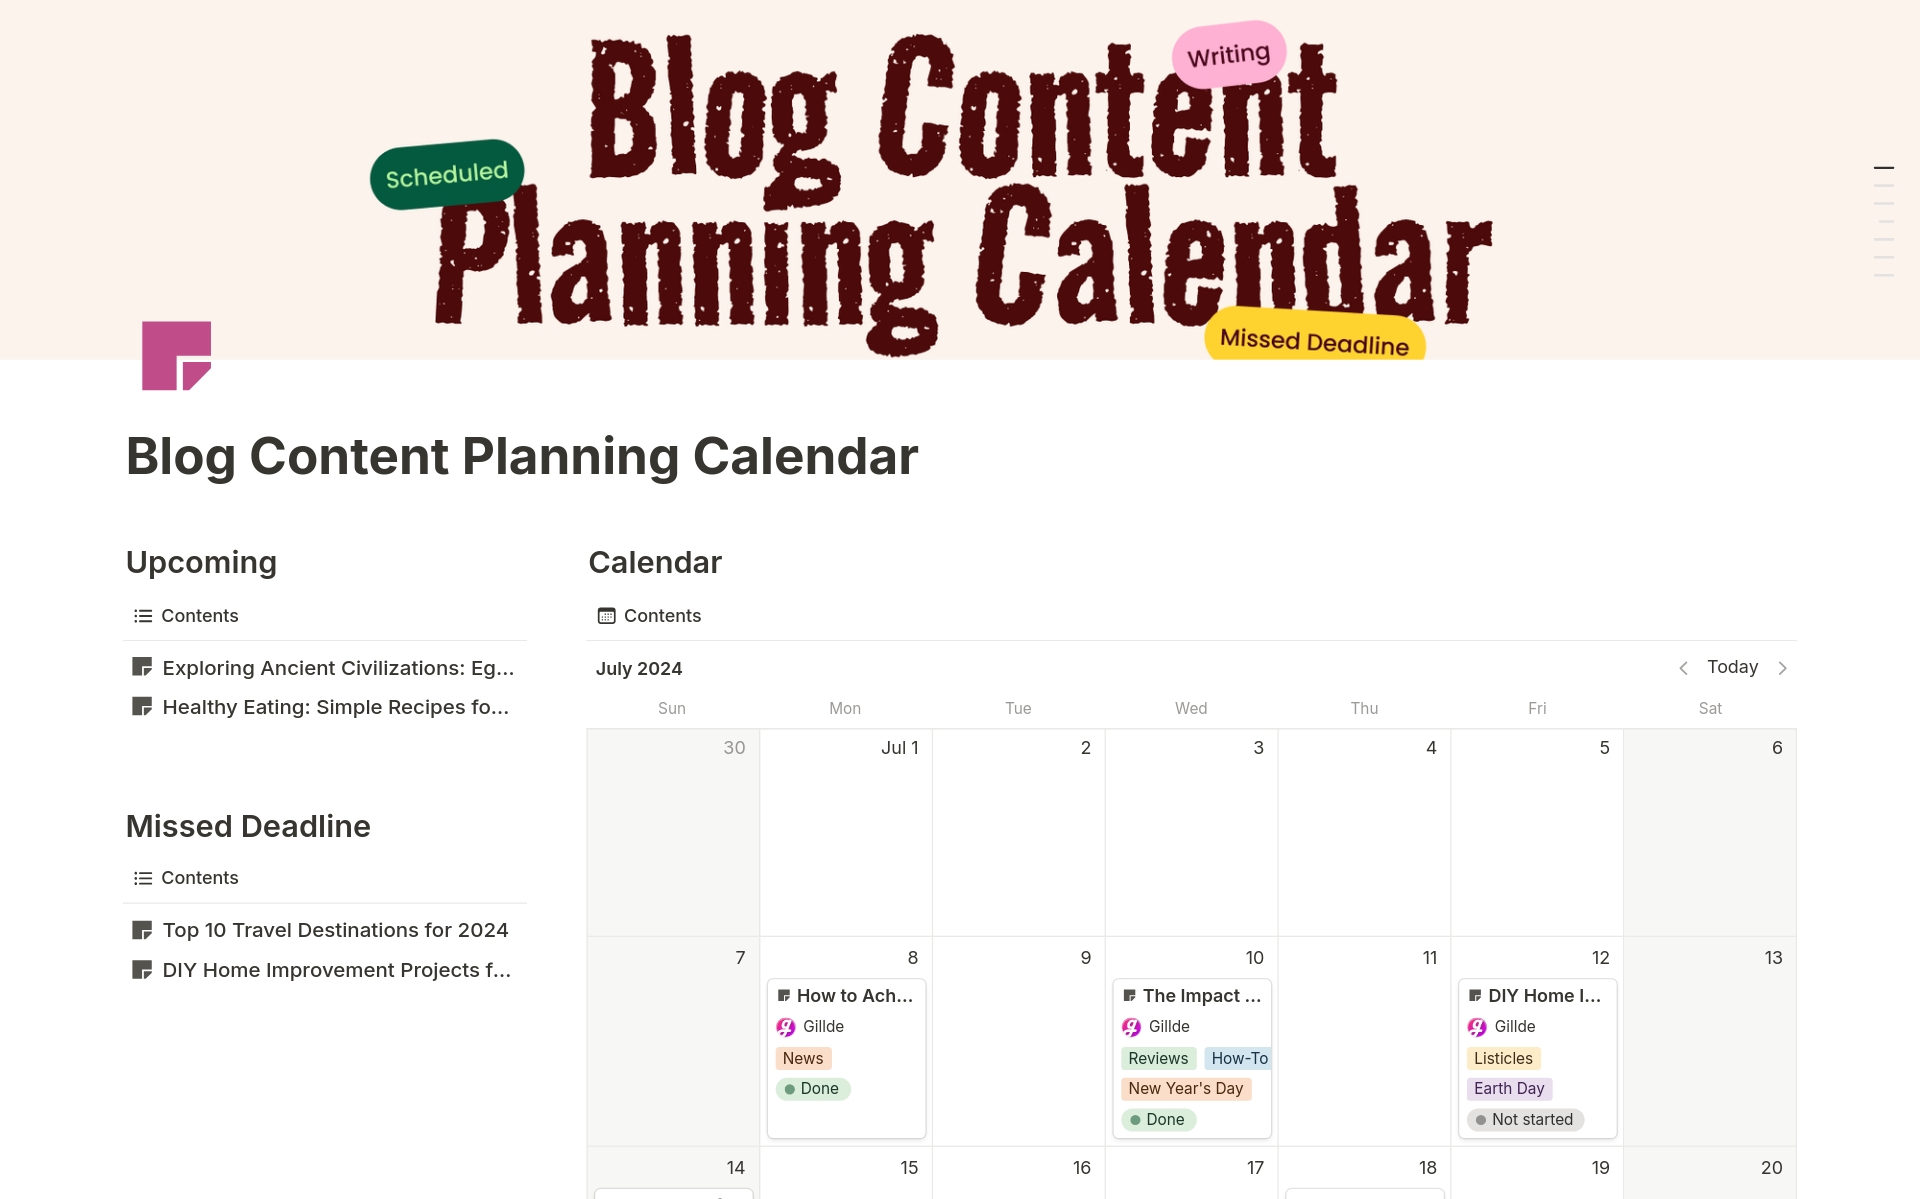 Free Notion template for planning and organizing your blog content. Stay ahead with ease!